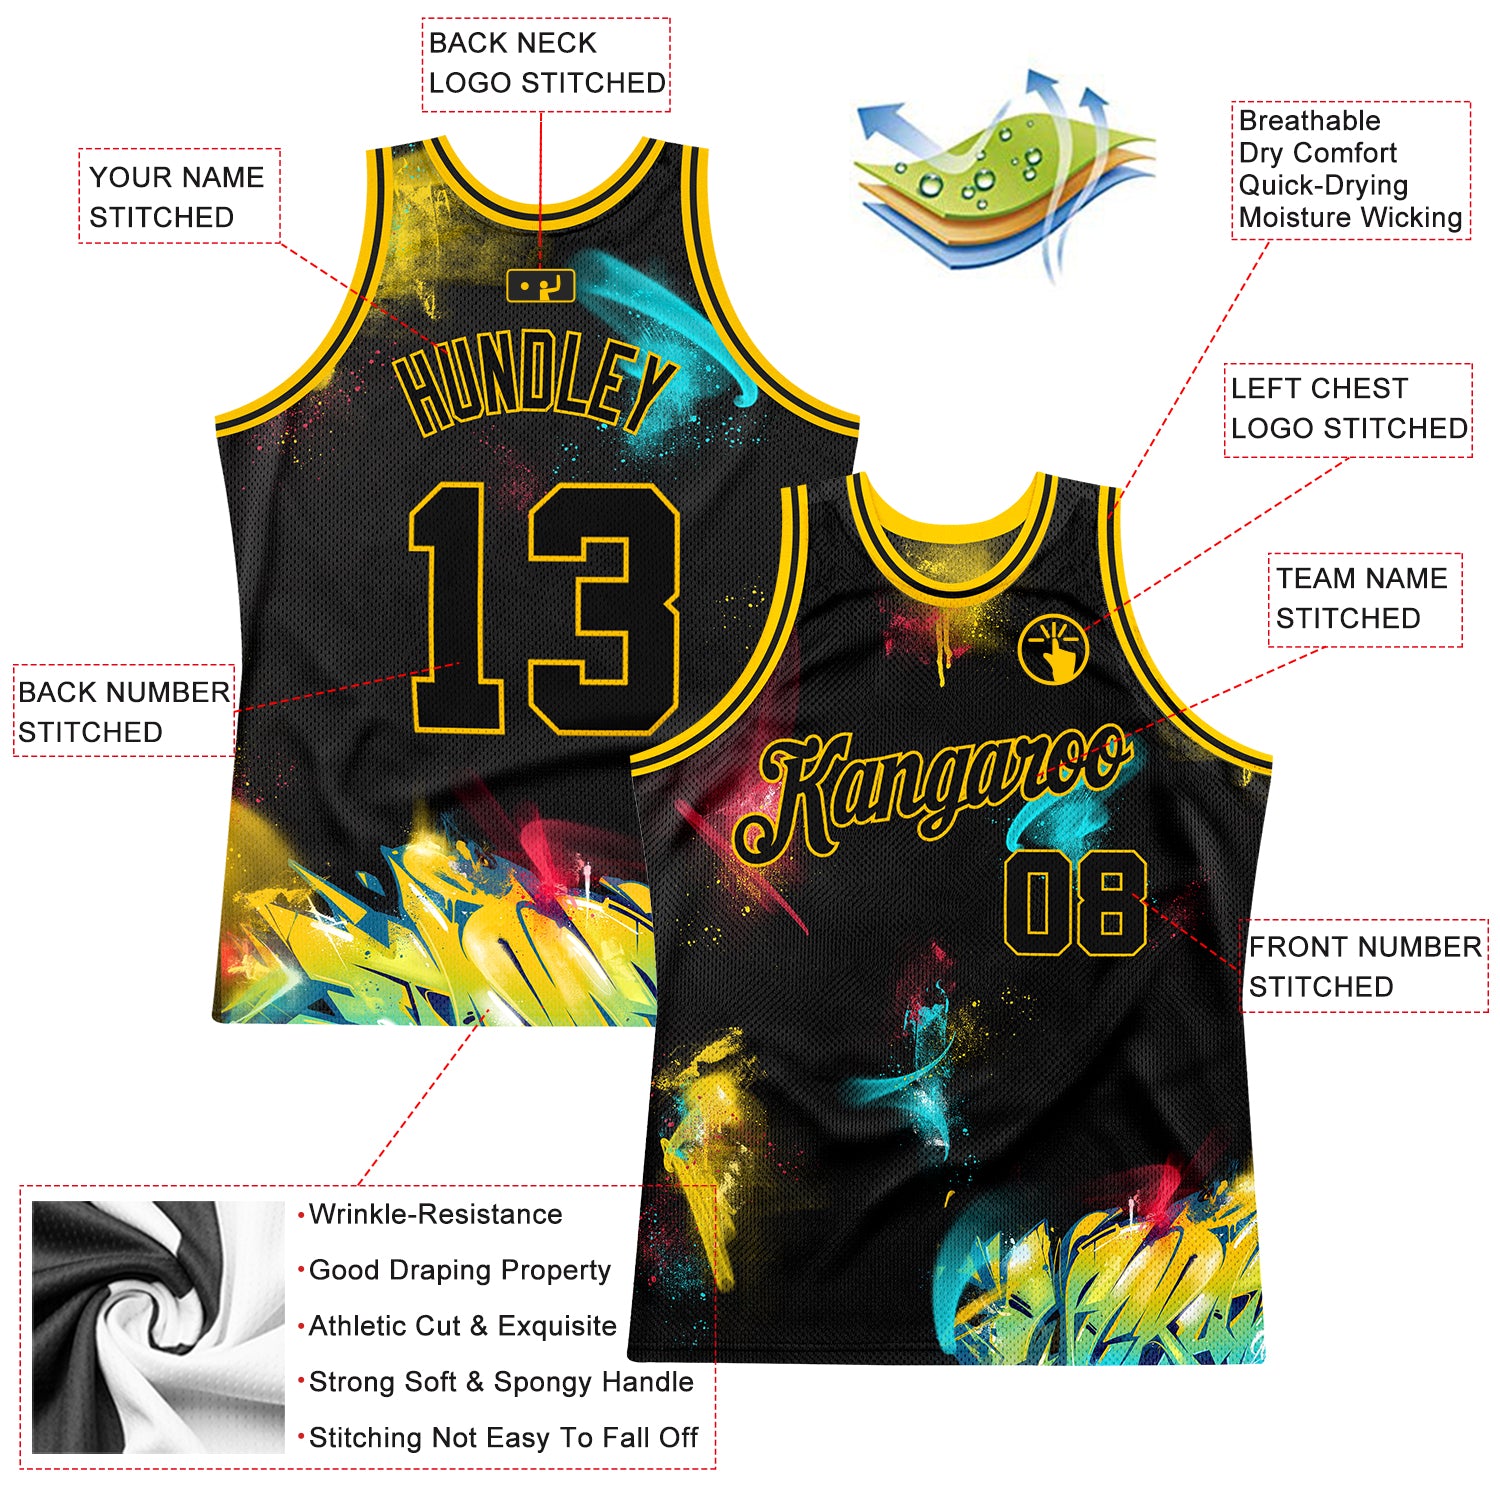 Customize Your Own Basketball Jersey - Free 3D Tool